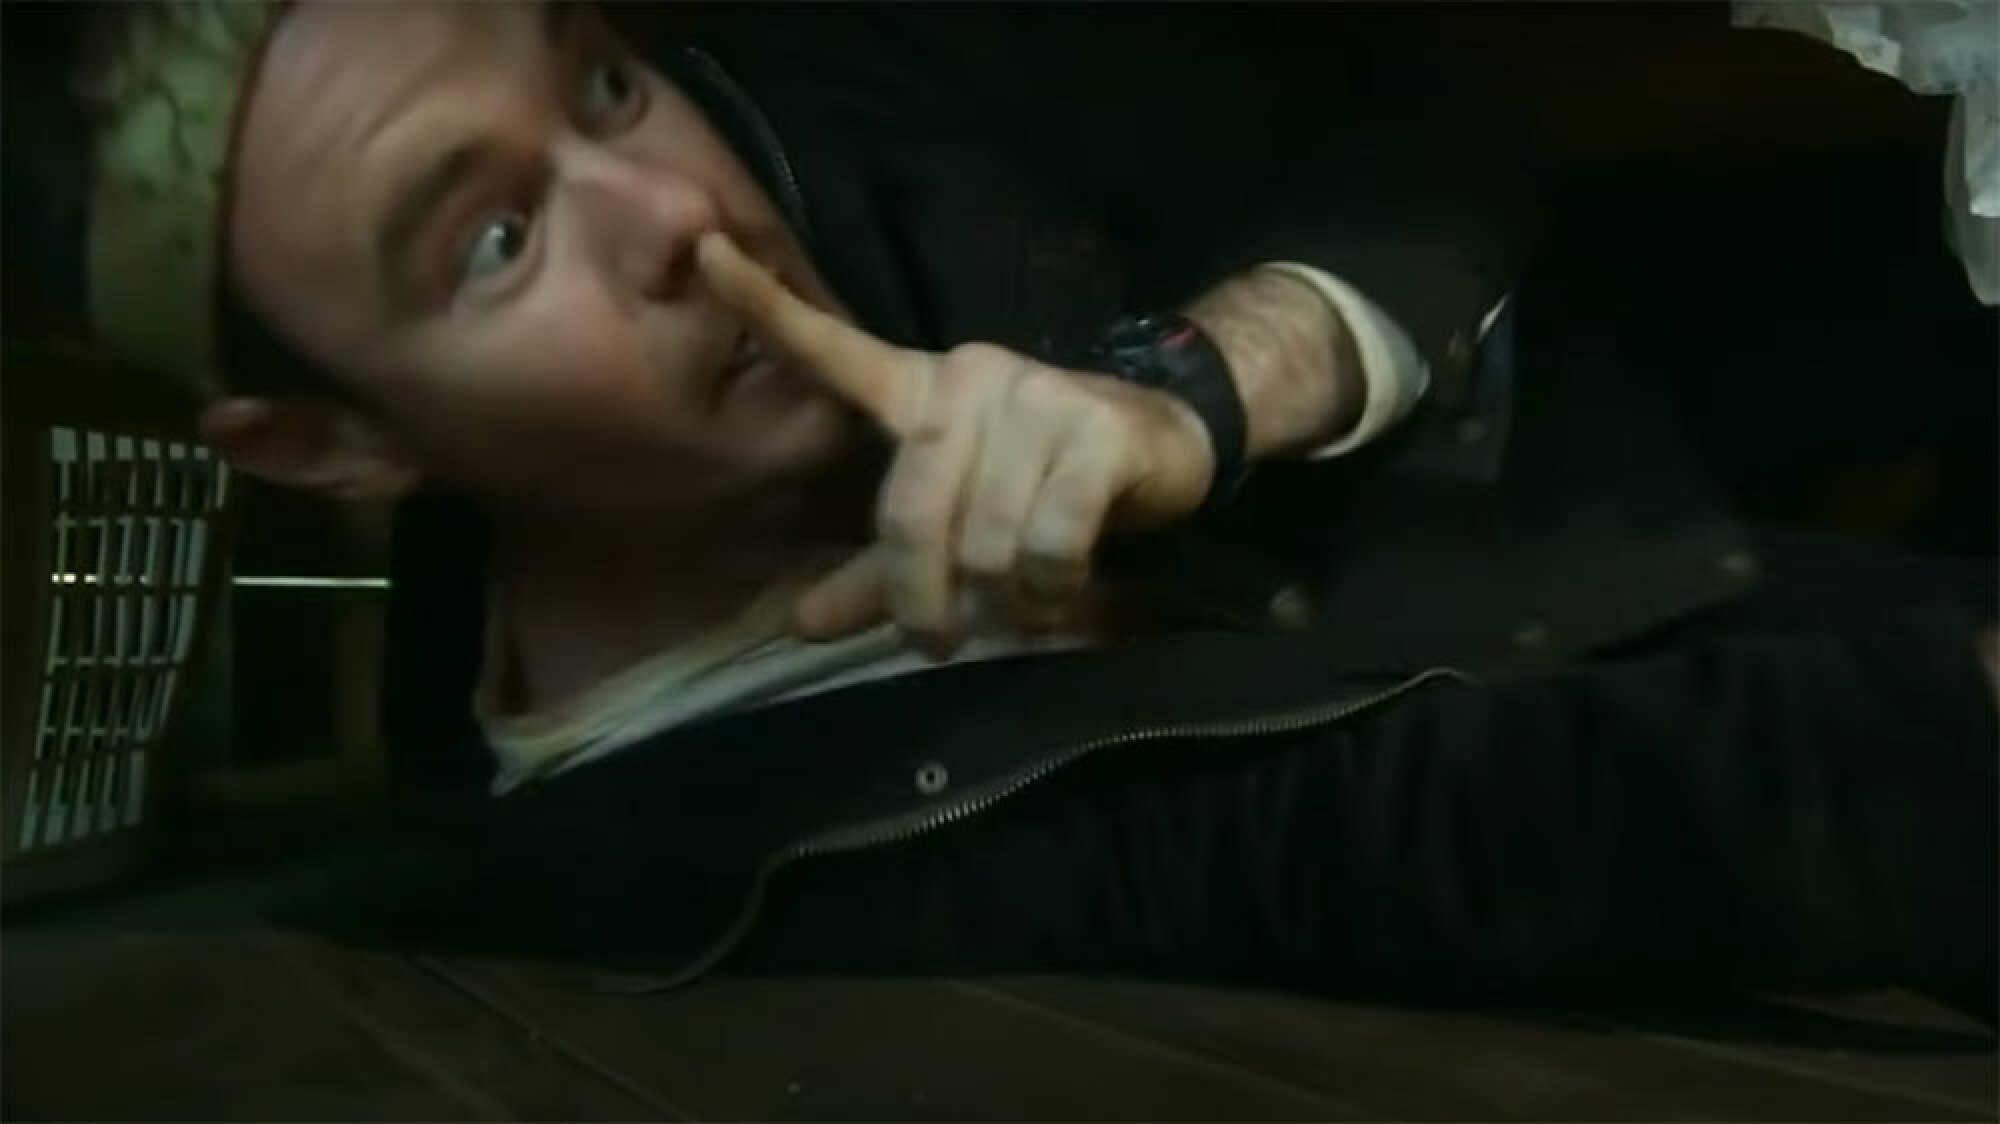 A man hiding under a bed presses his finger to his lips.